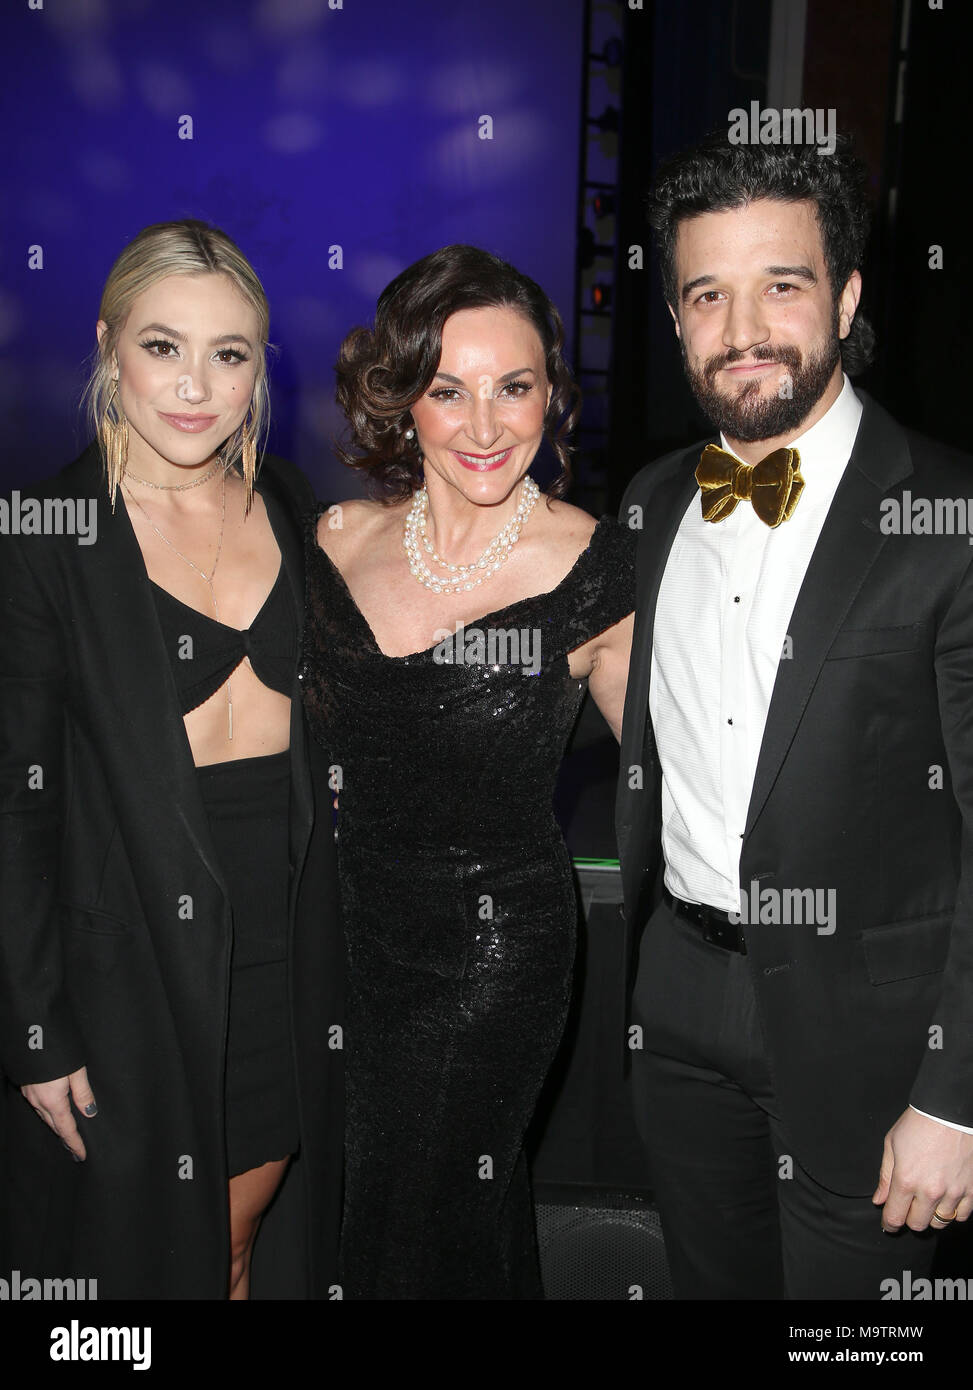 BBC Strictly's Shirley Ballas welcomes new family arrival as son unveils  unique baby name | Celebrity News | Showbiz & TV | Express.co.uk